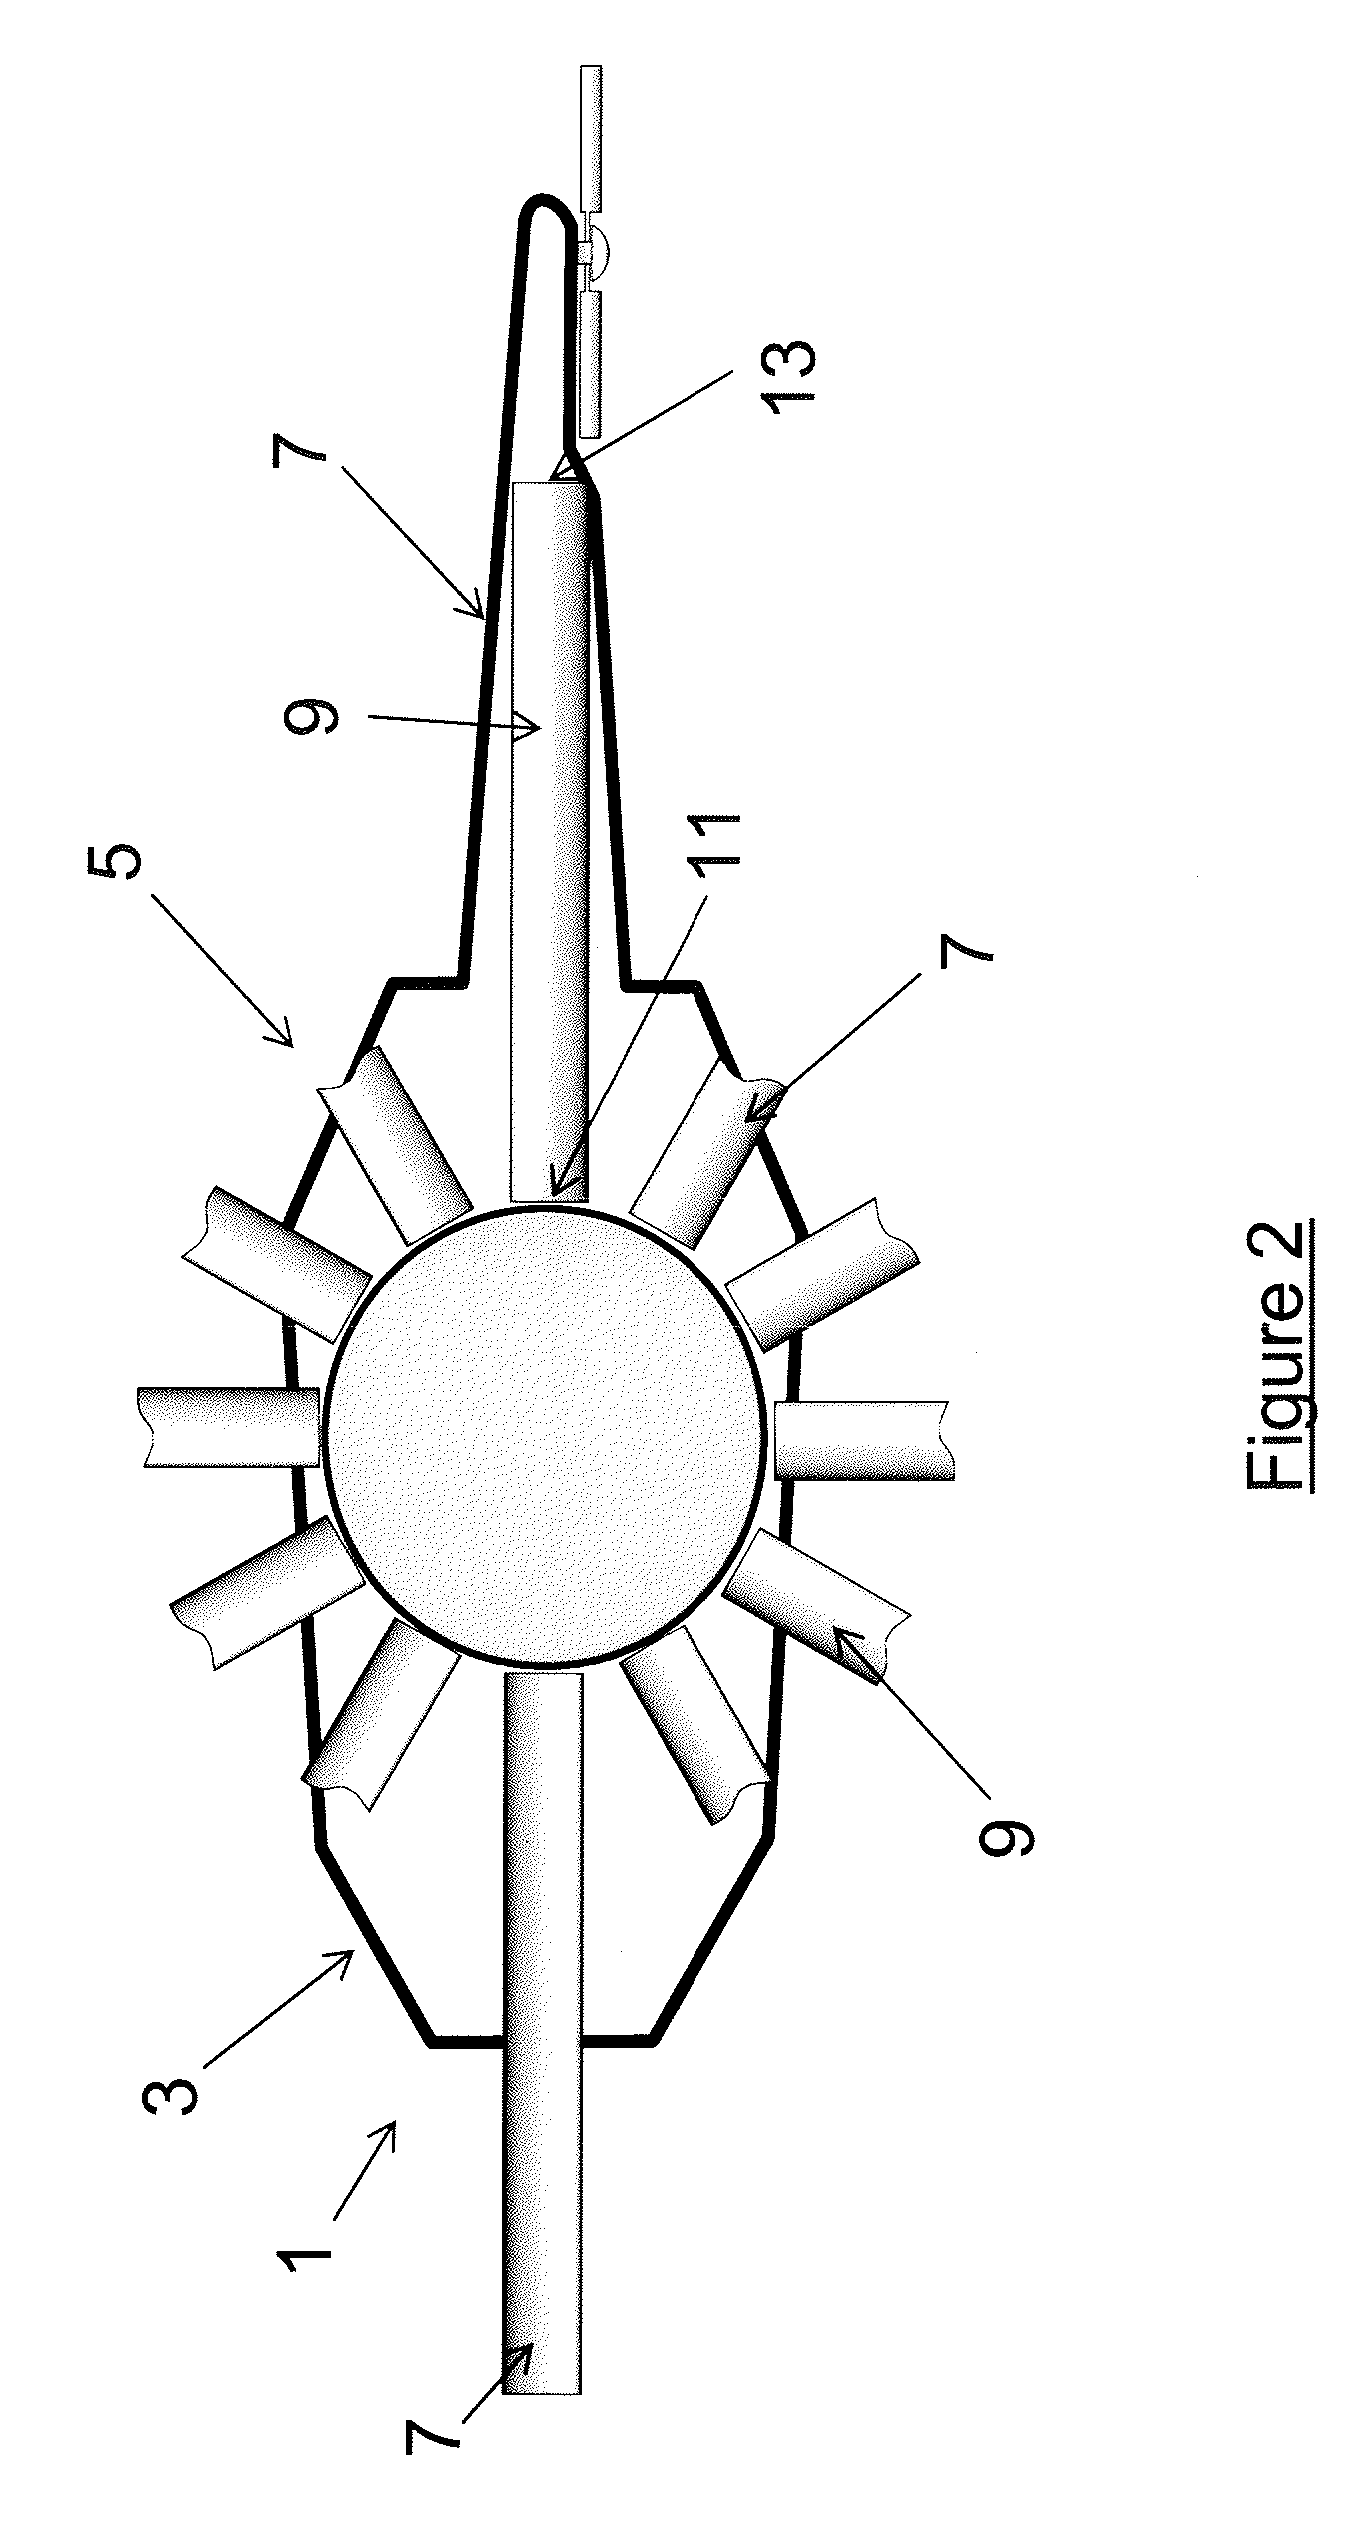 Rotor assembly for a rotorcraft